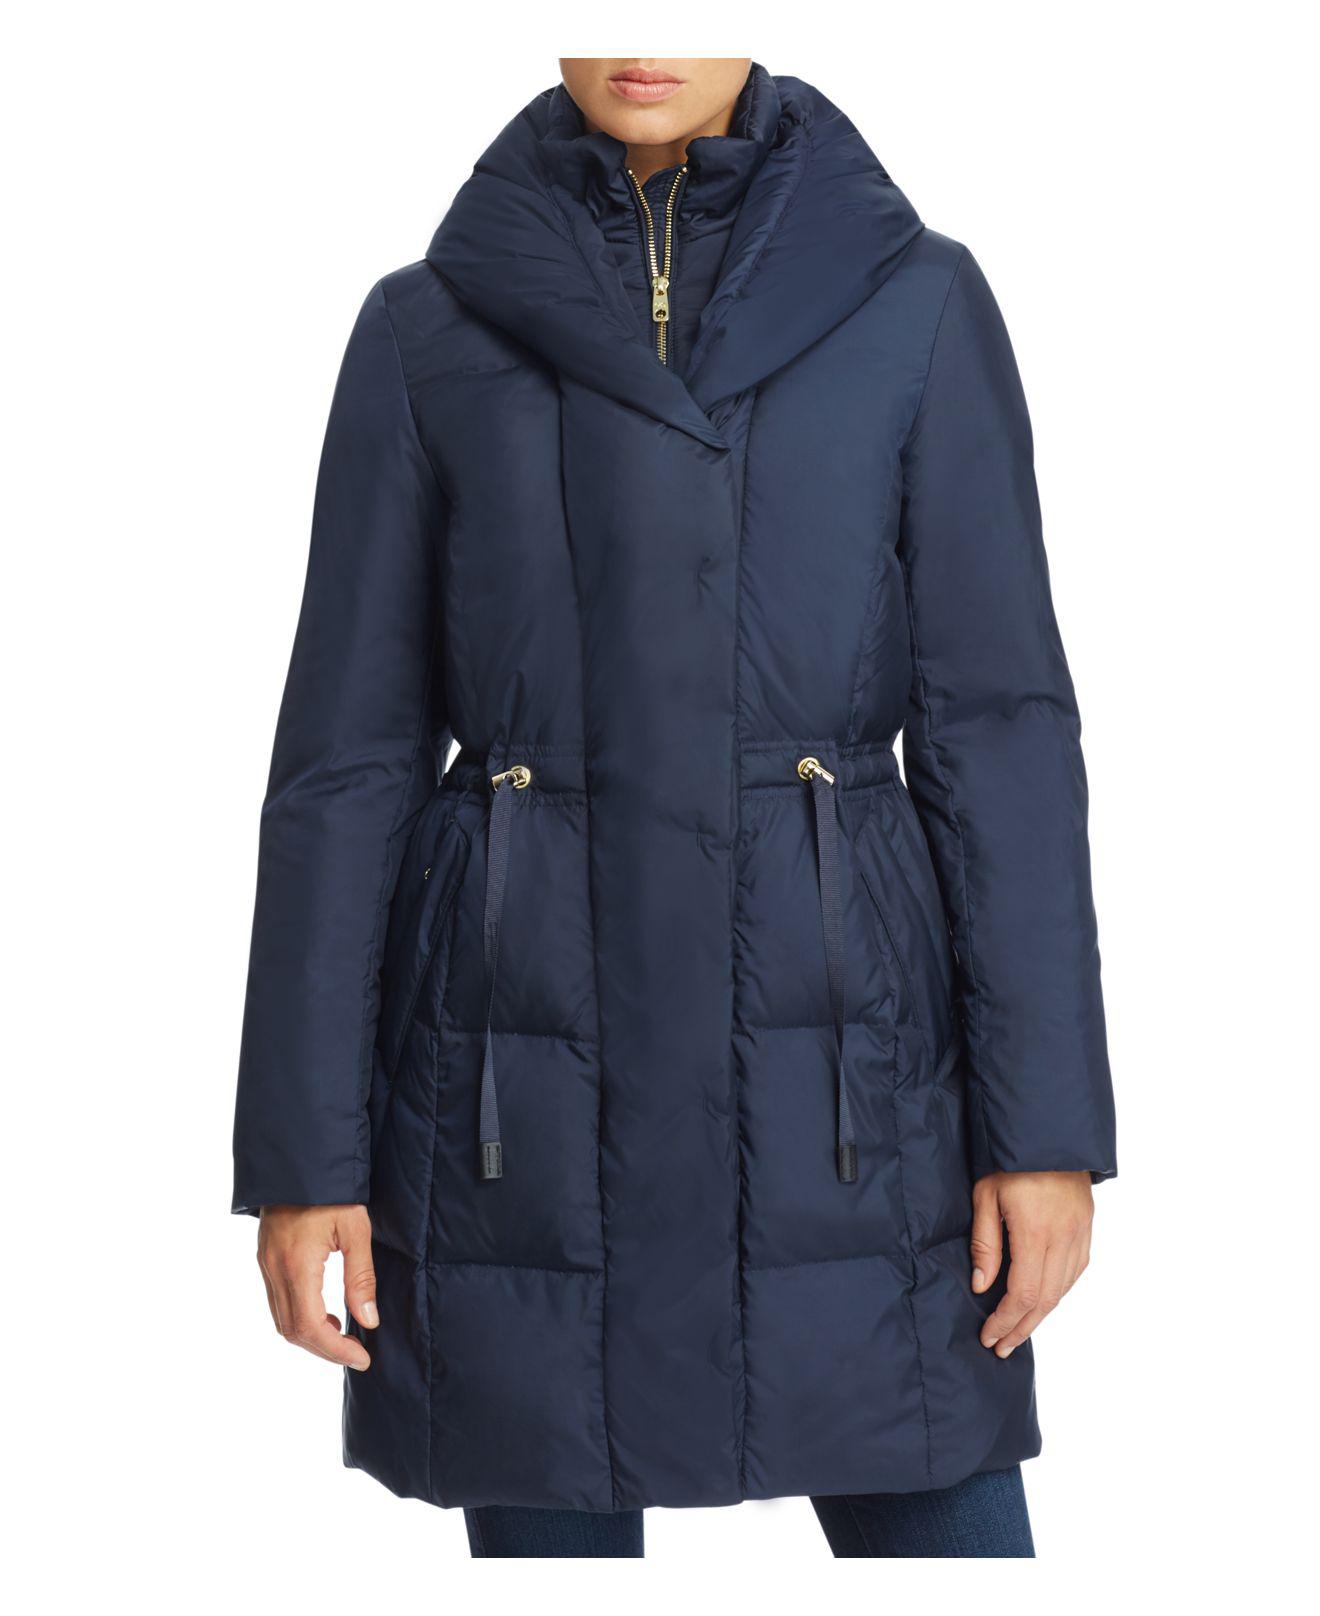 Lyst - Cole Haan Shawl Collar Coat in Blue